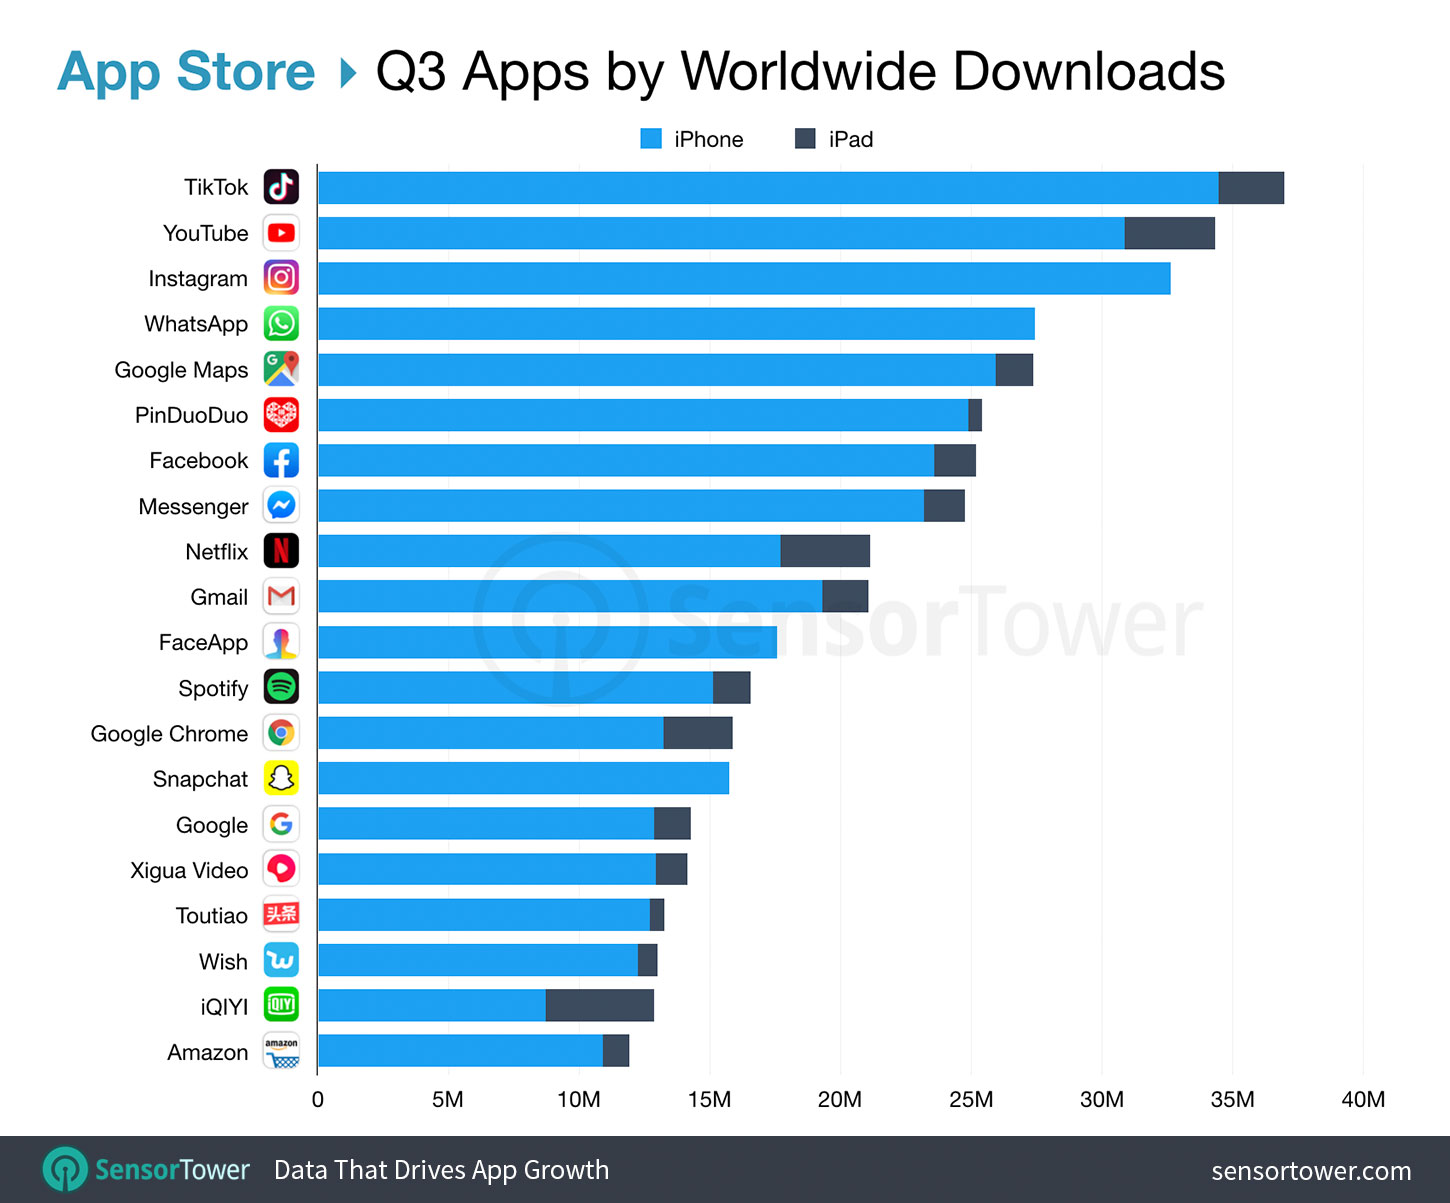 Top App Store Apps Worldwide for Q3 2019